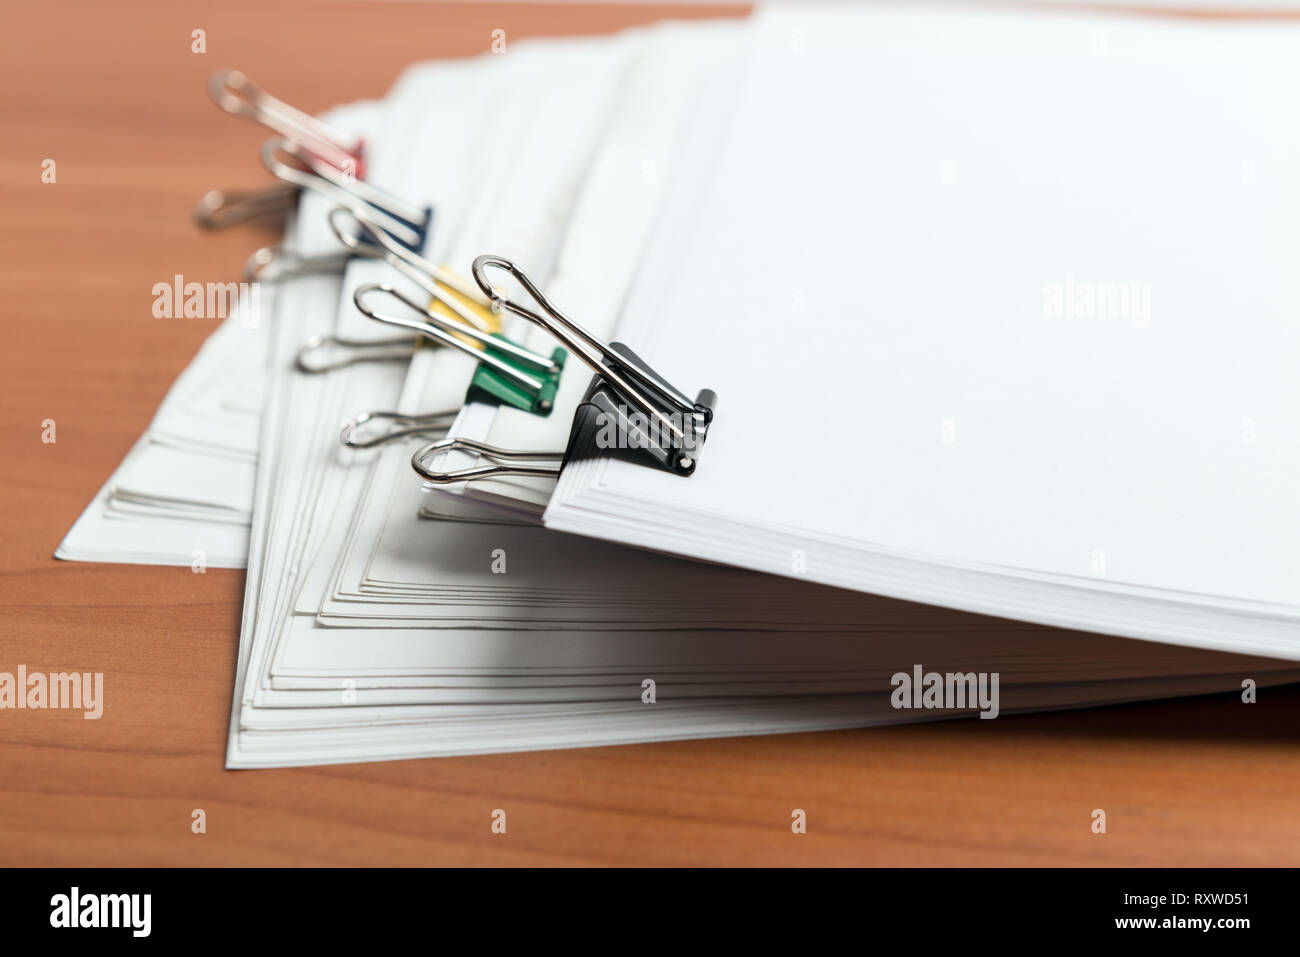 White paper document template with metal color clips on work table side view Stock Photo